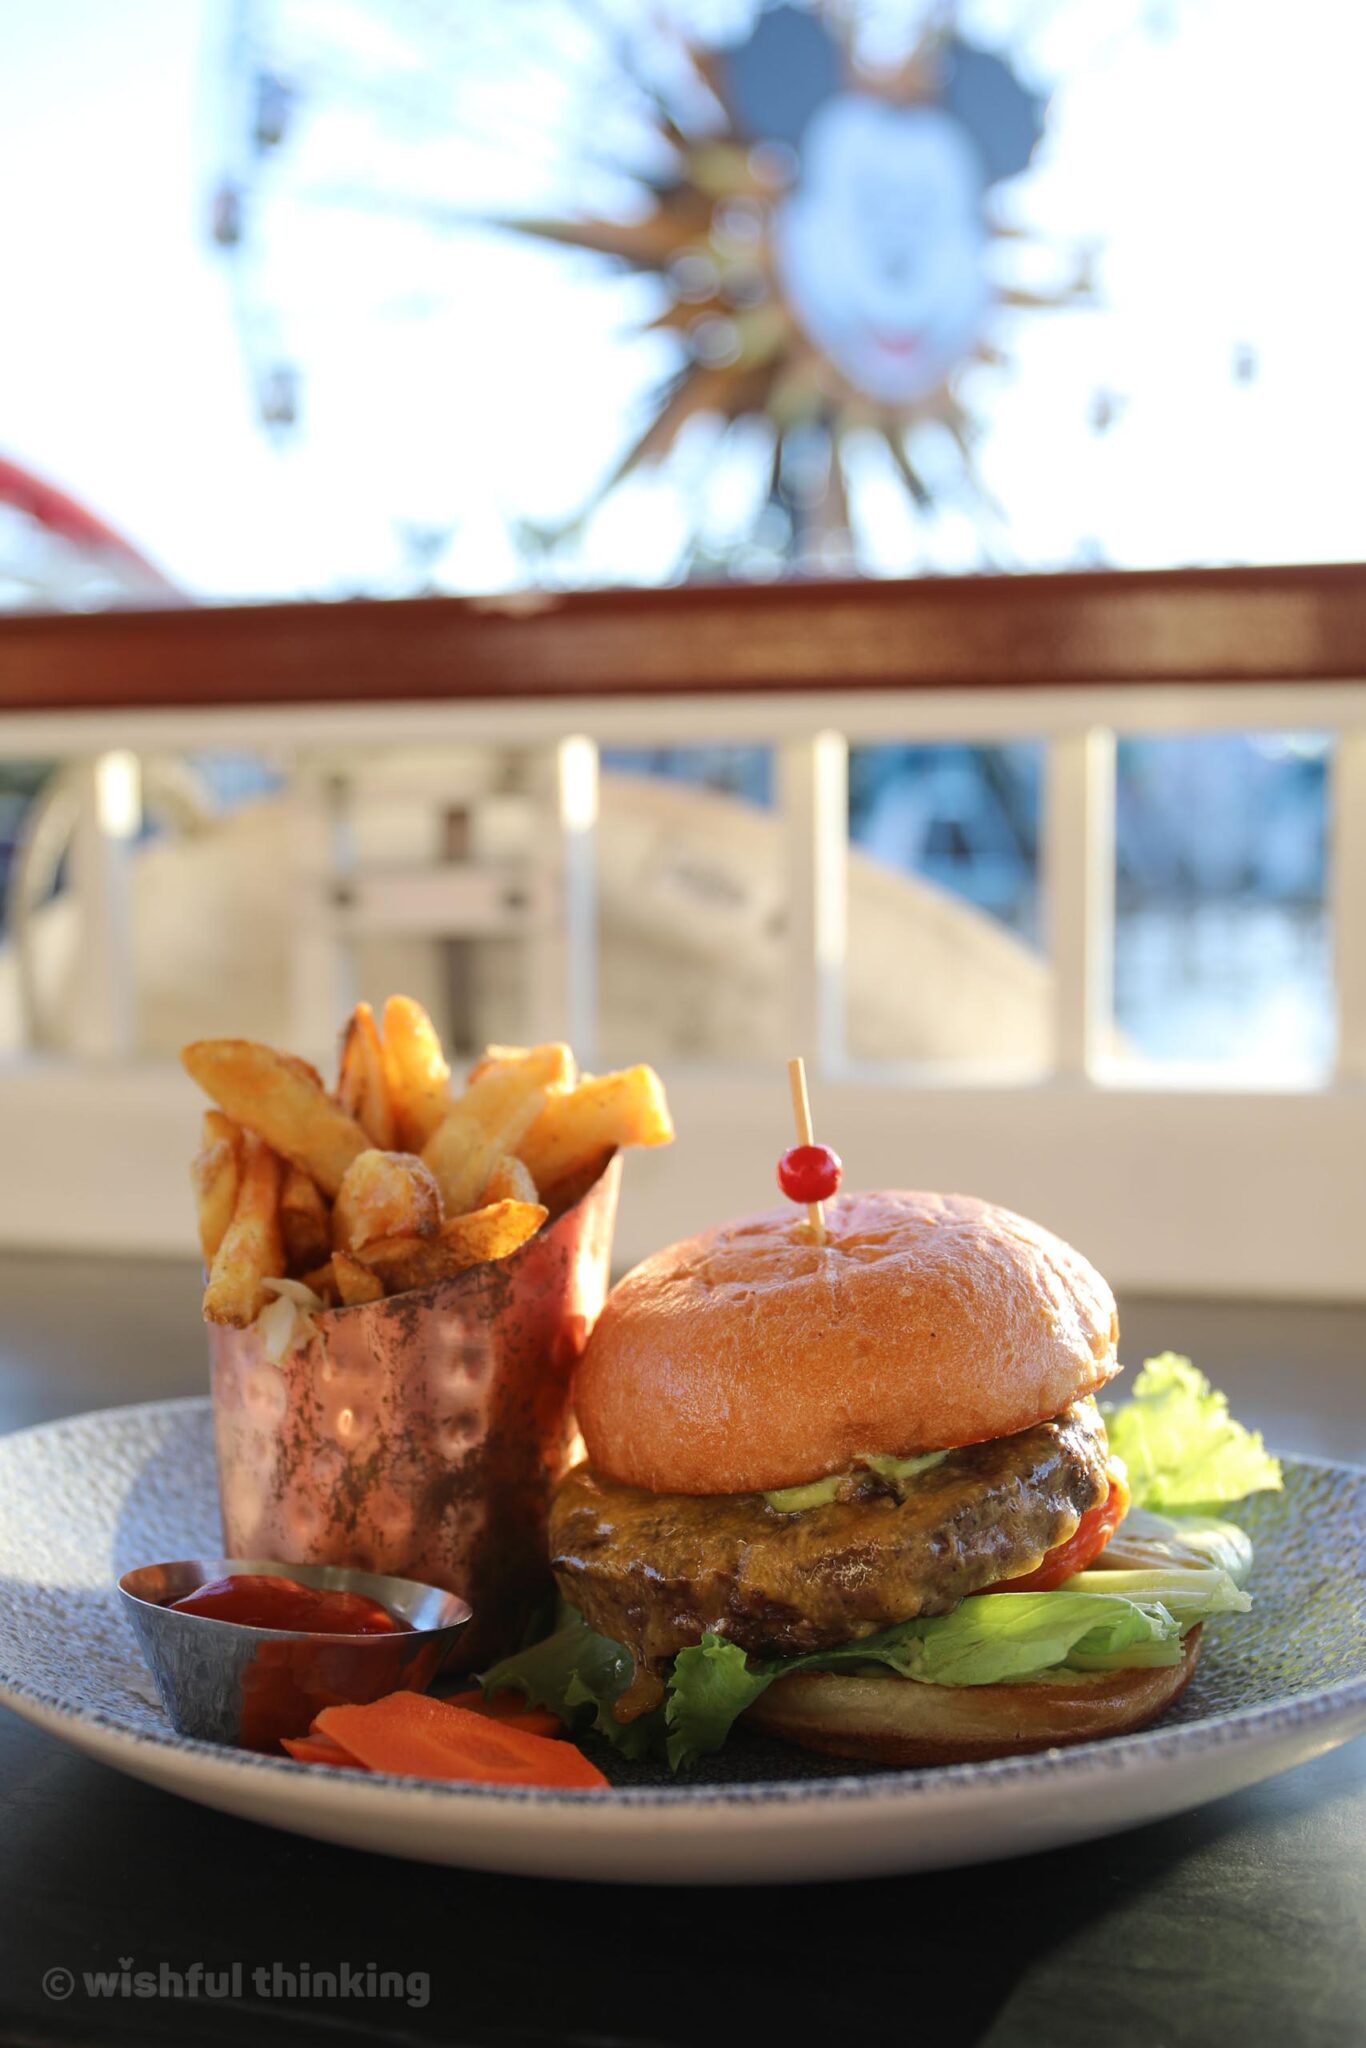 At Lamplight Lounge in Disney California Adventure, a tasty burger and fries tempts diners on a sun-drenched terrace with a view of Pixar Pier